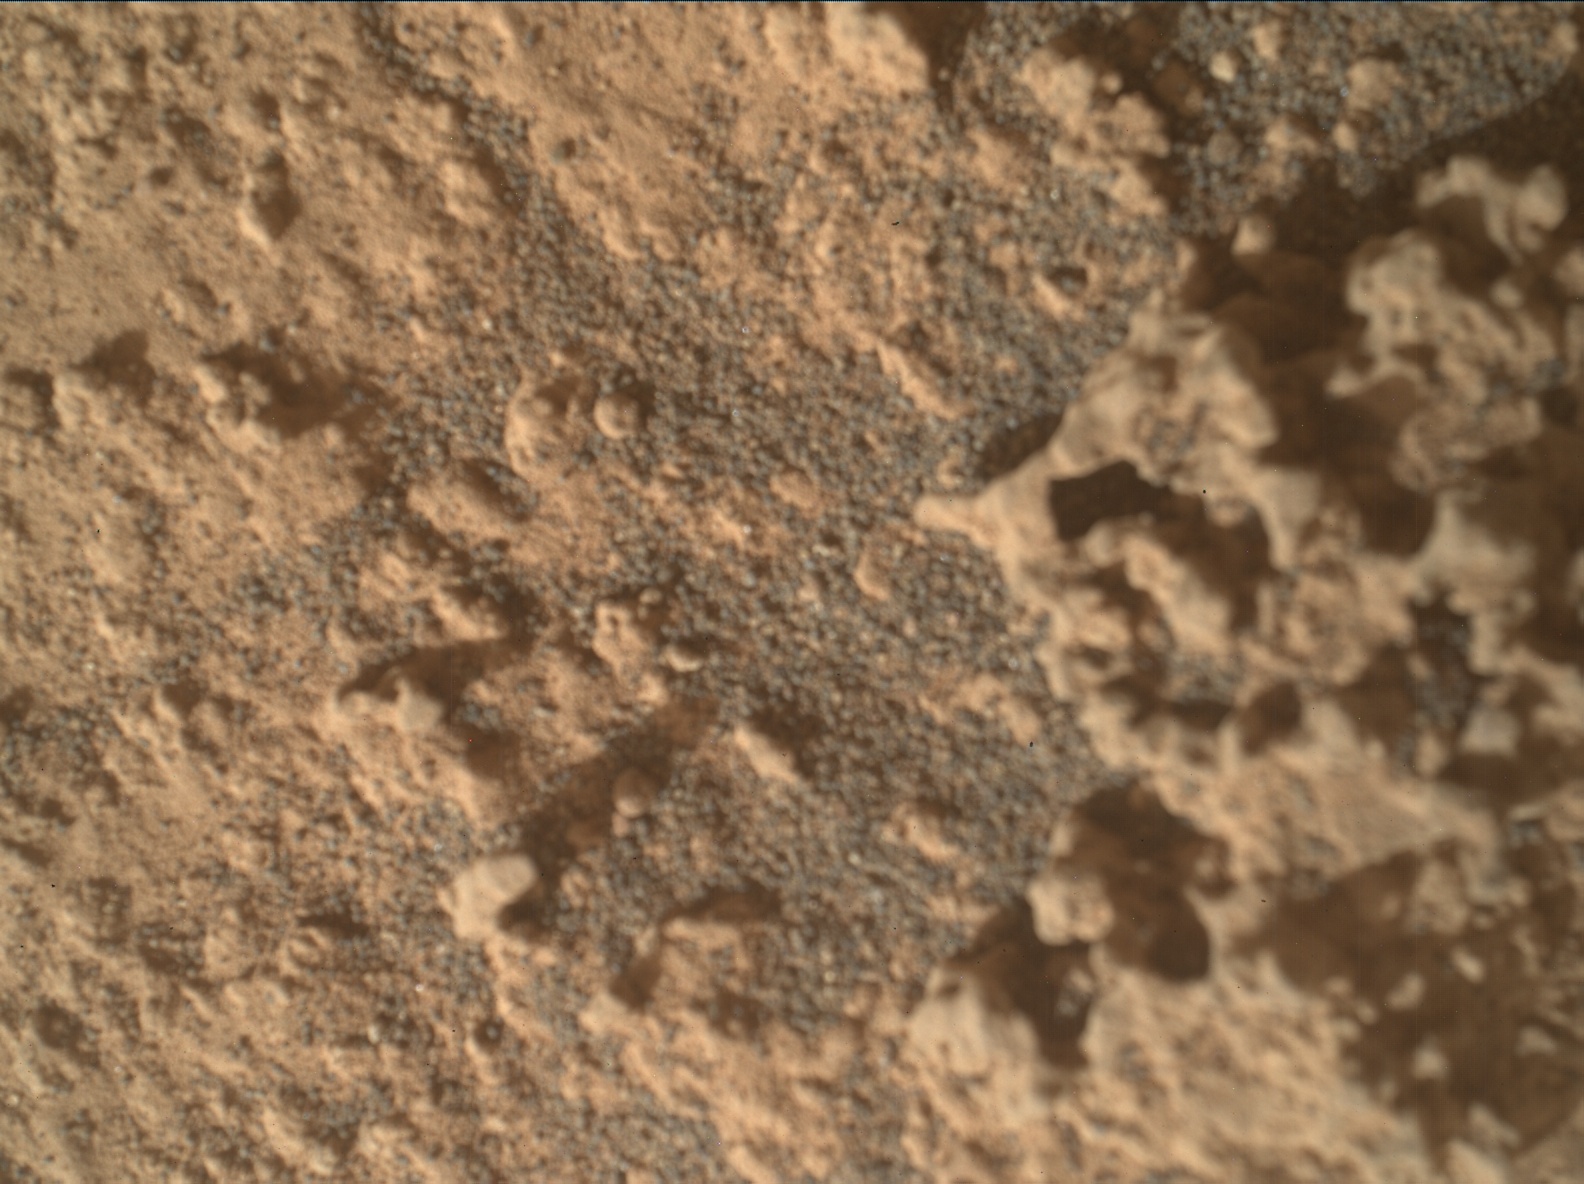 Nasa's Mars rover Curiosity acquired this image using its Mars Hand Lens Imager (MAHLI) on Sol 3575